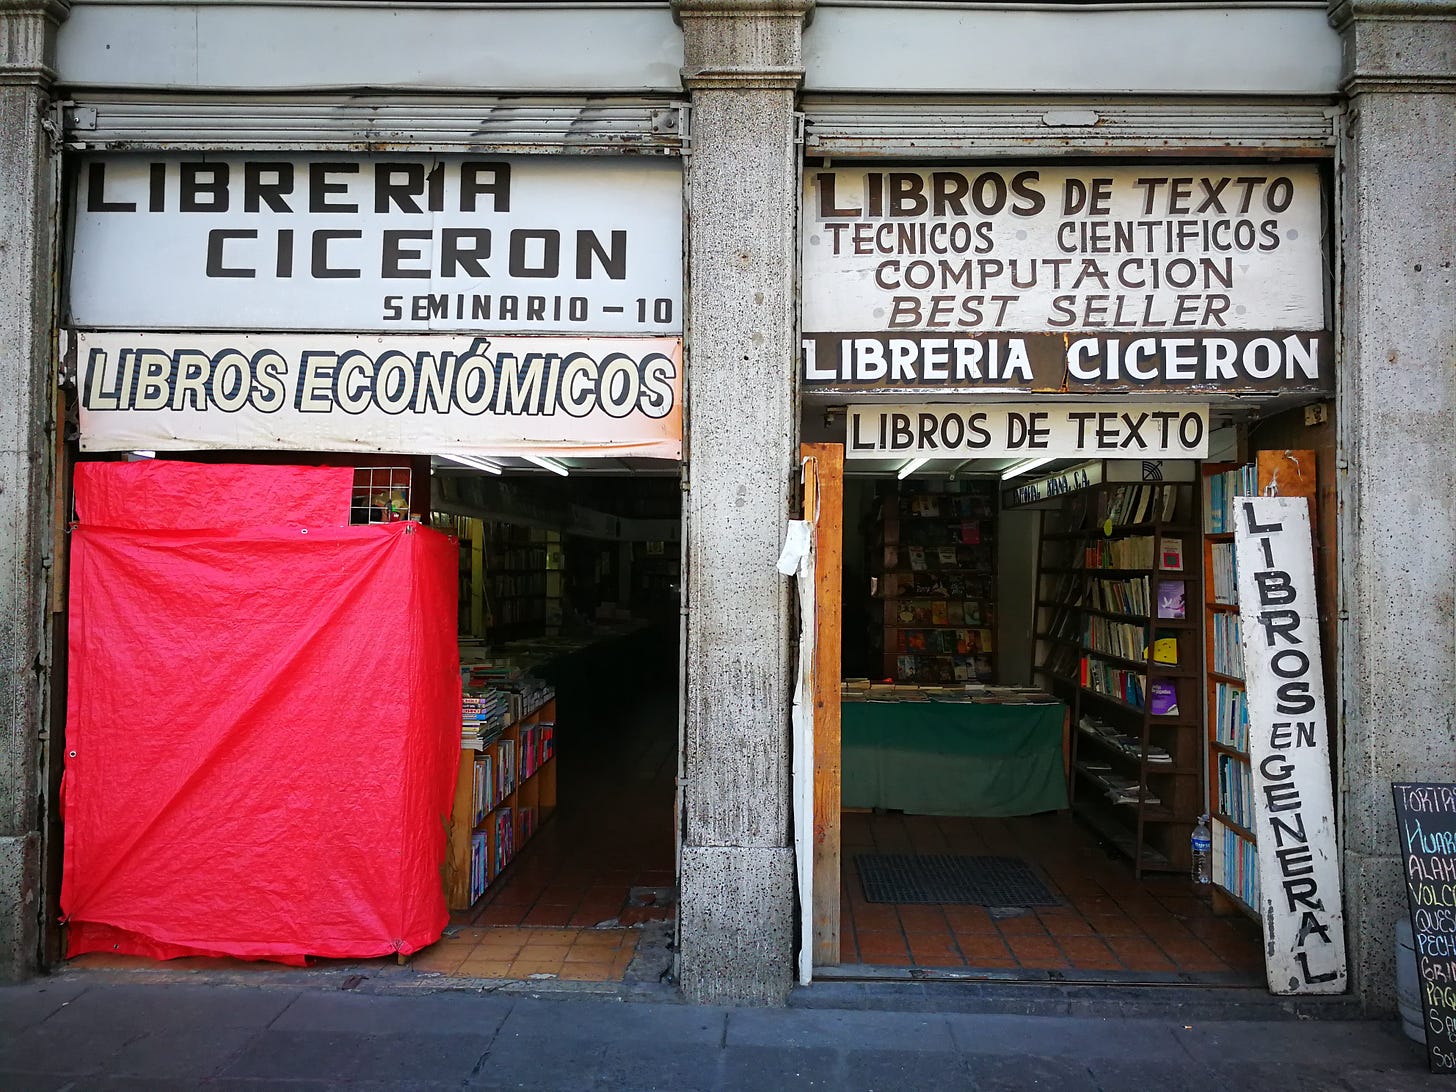 A secondhand bookshop in Mexico City, offering Libros Economicos (cheap books) Libros de Texto (textbooks) and Libros En General which you probably get the idea. The shop is open-fronted and you can see shelves extending far back into the darkness within